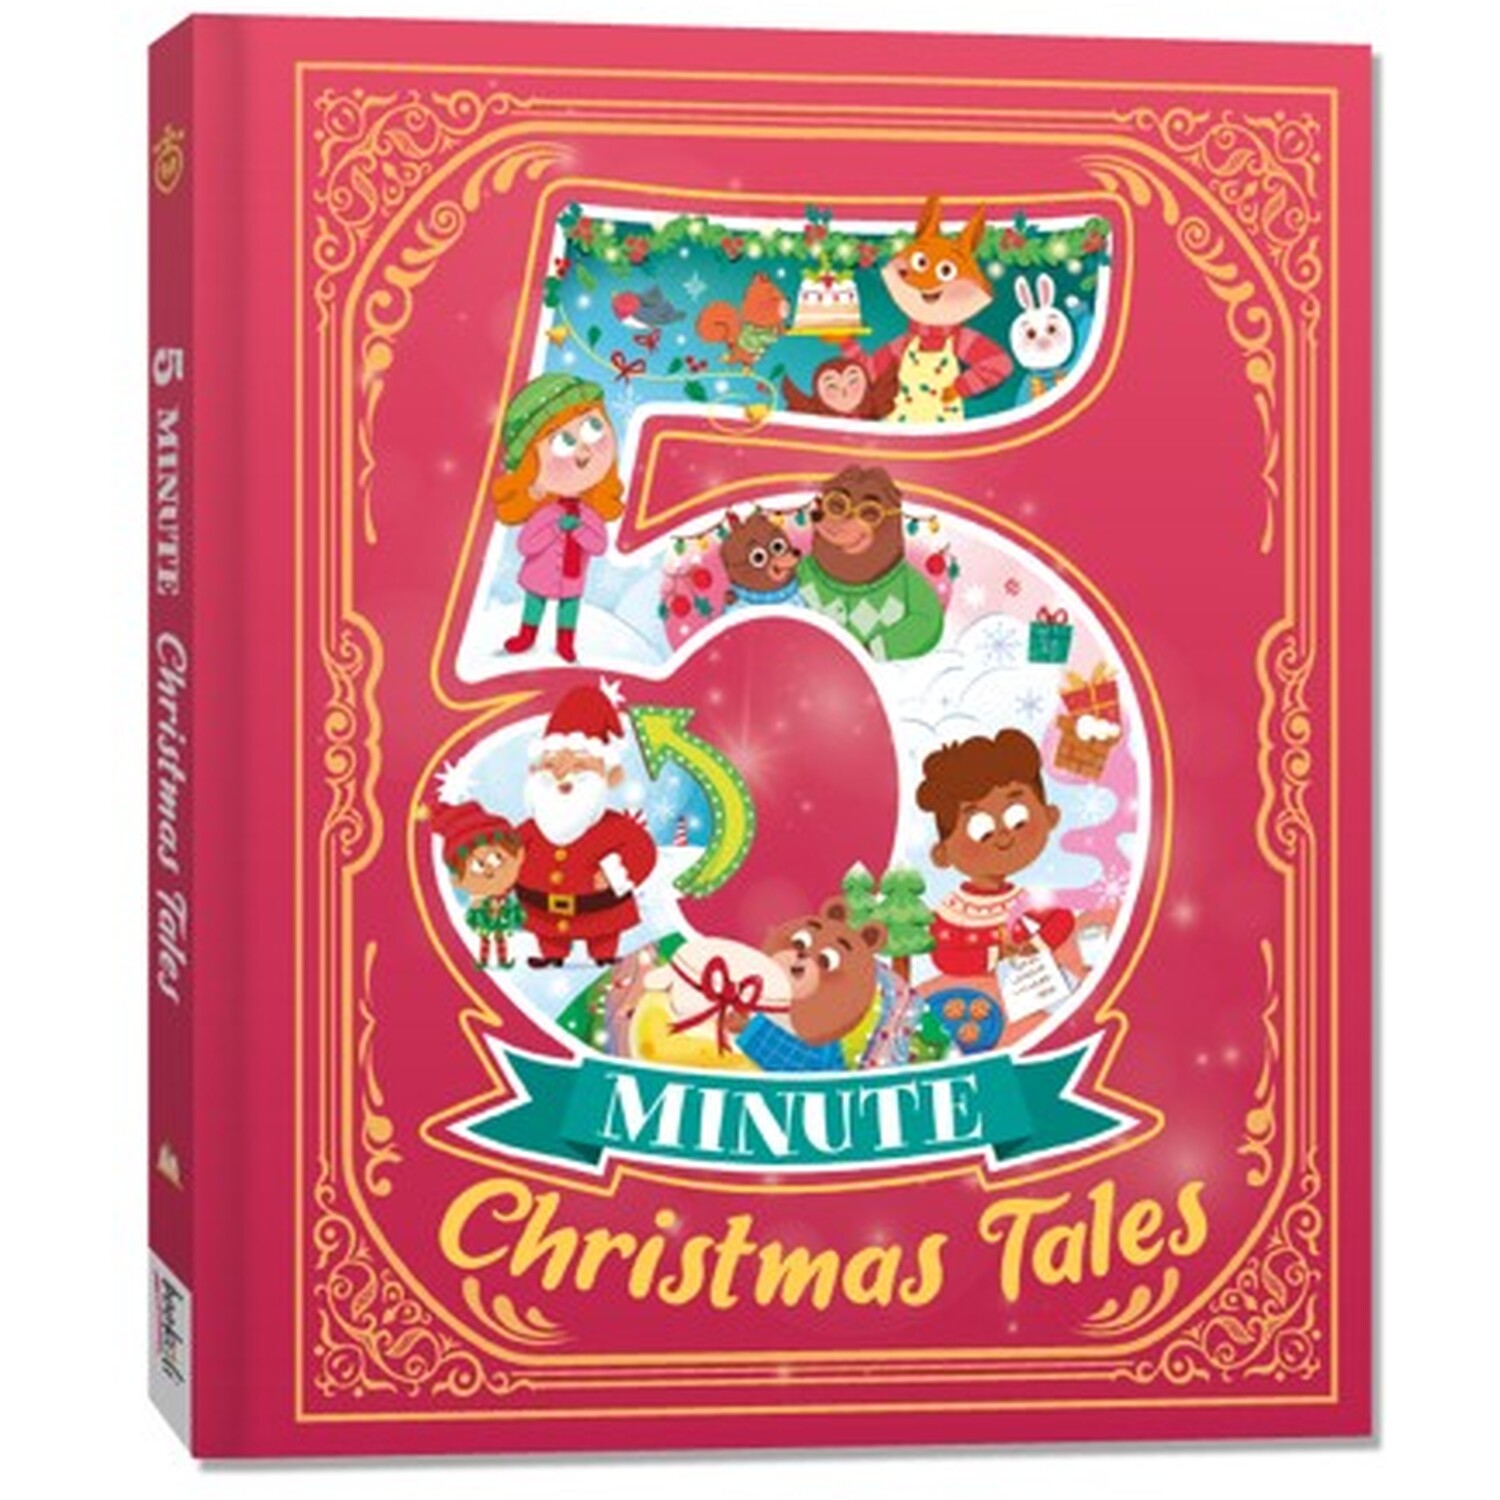 5 Minute Christmas Tales Image